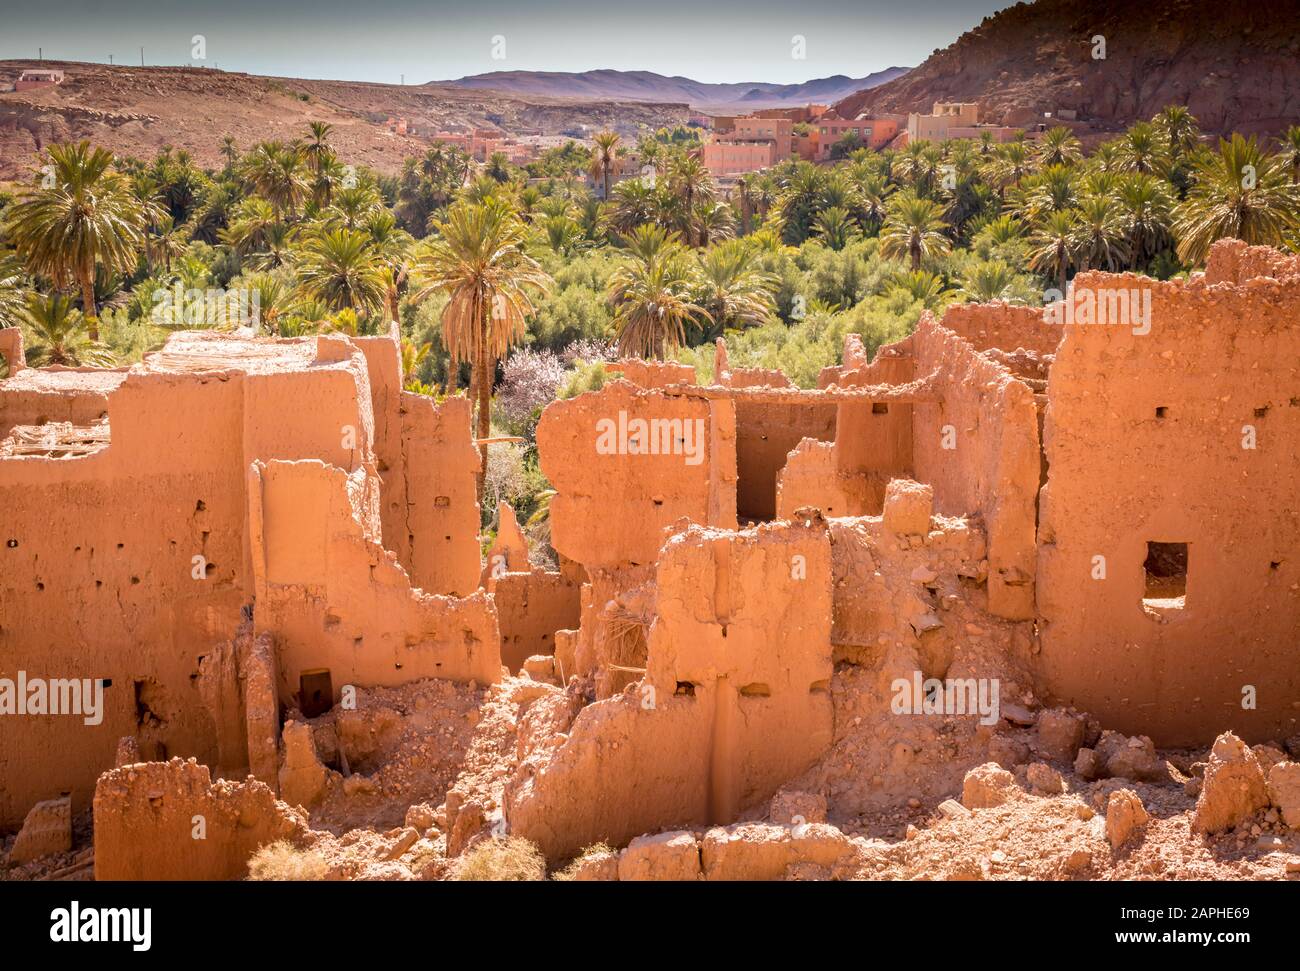 Ancient kasbah ruins and palm trees in Tinghir Morocco Stock Photo